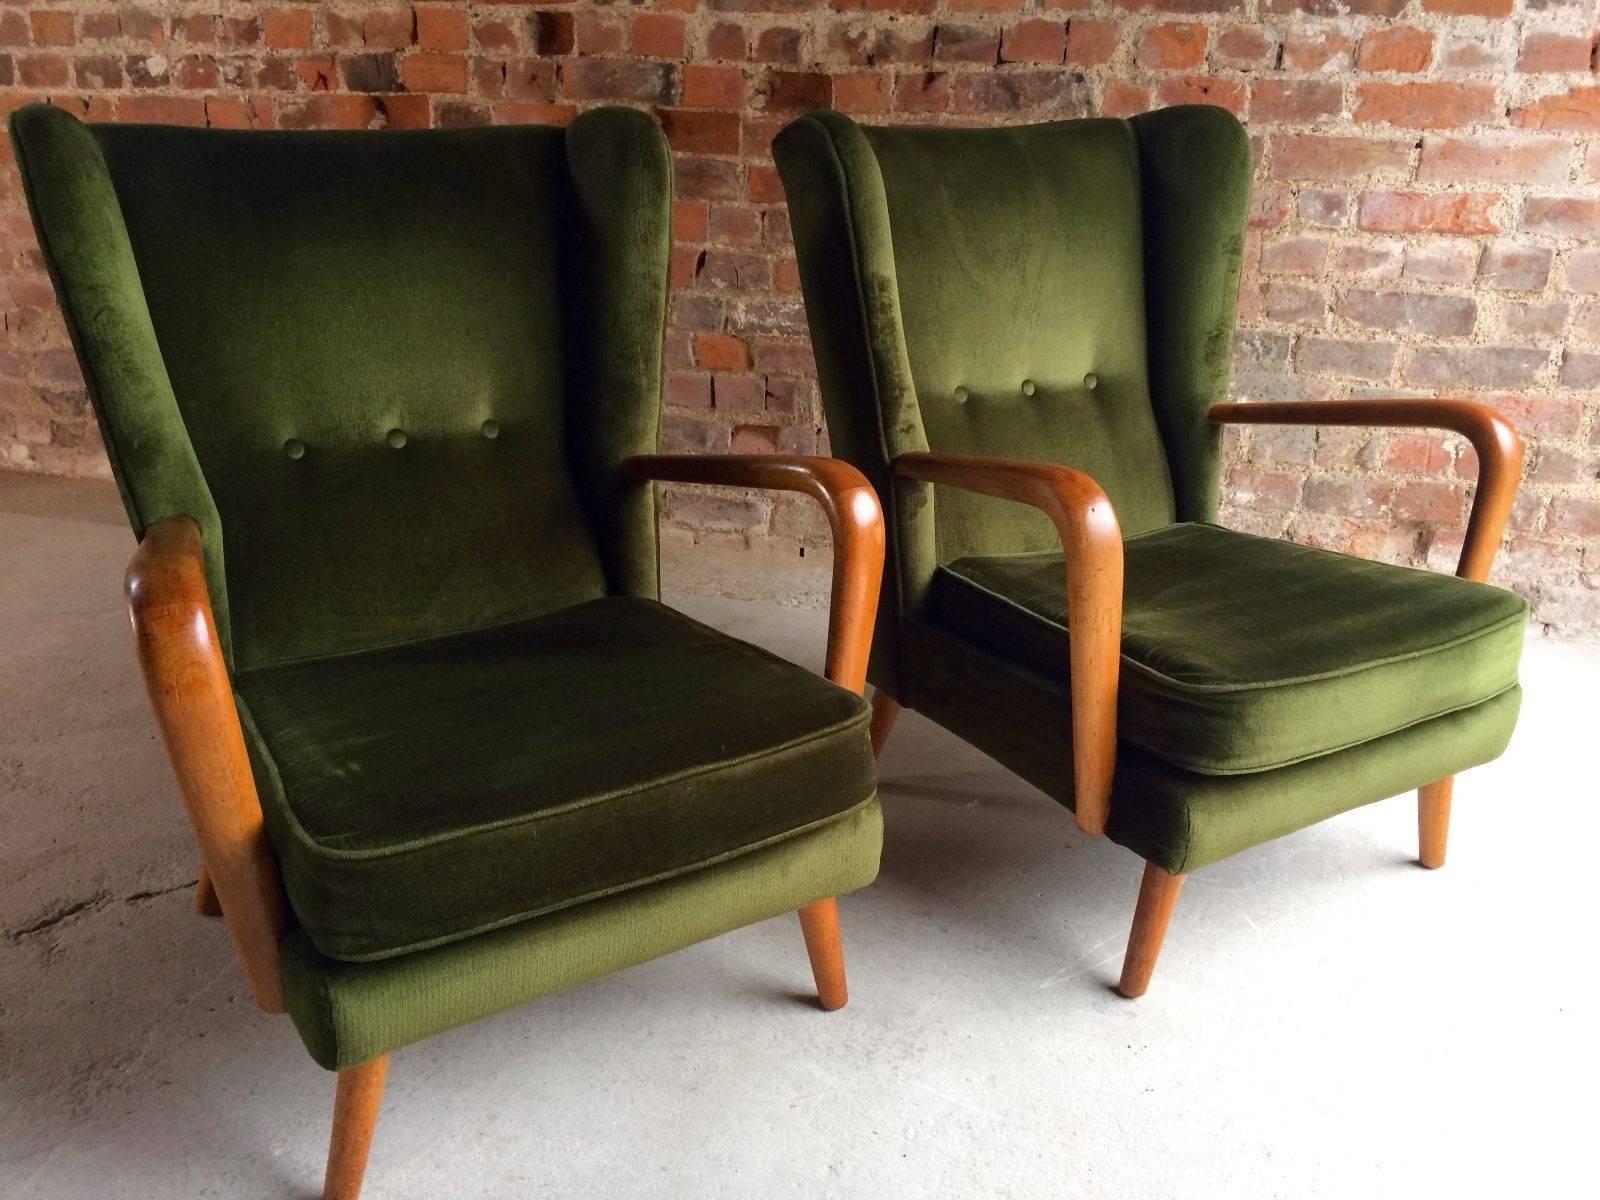 A stunningly beautiful and original pair of Howard Keith 'Bambino' armchairs offered in mint original condition and untouched circa 1960s, the chairs are offered in original condition with a deep bottle green velour upholstery, stamped HK to base,